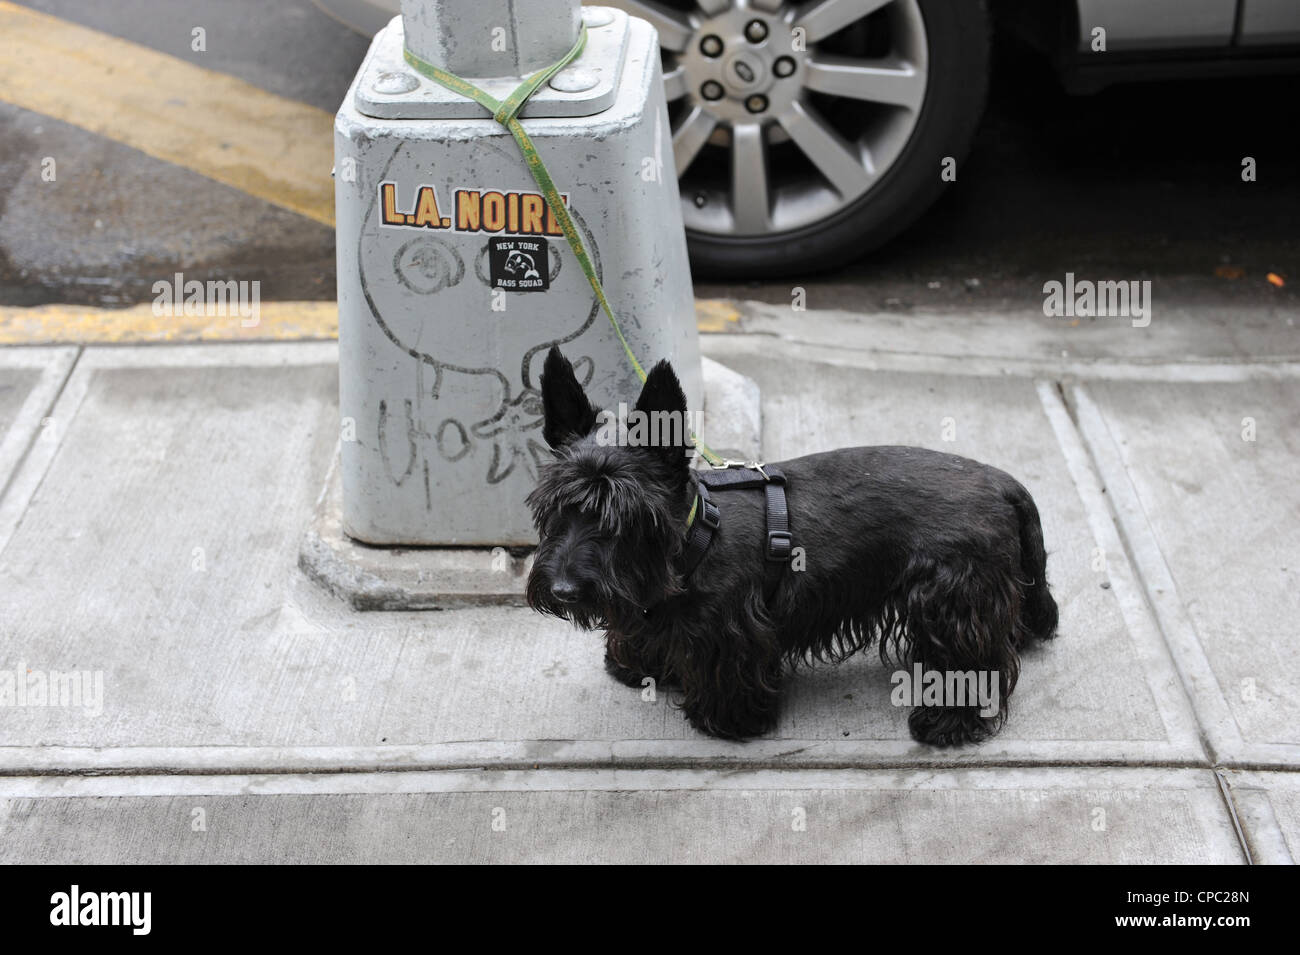 Black dog tied to a street sign New York Stock Photo